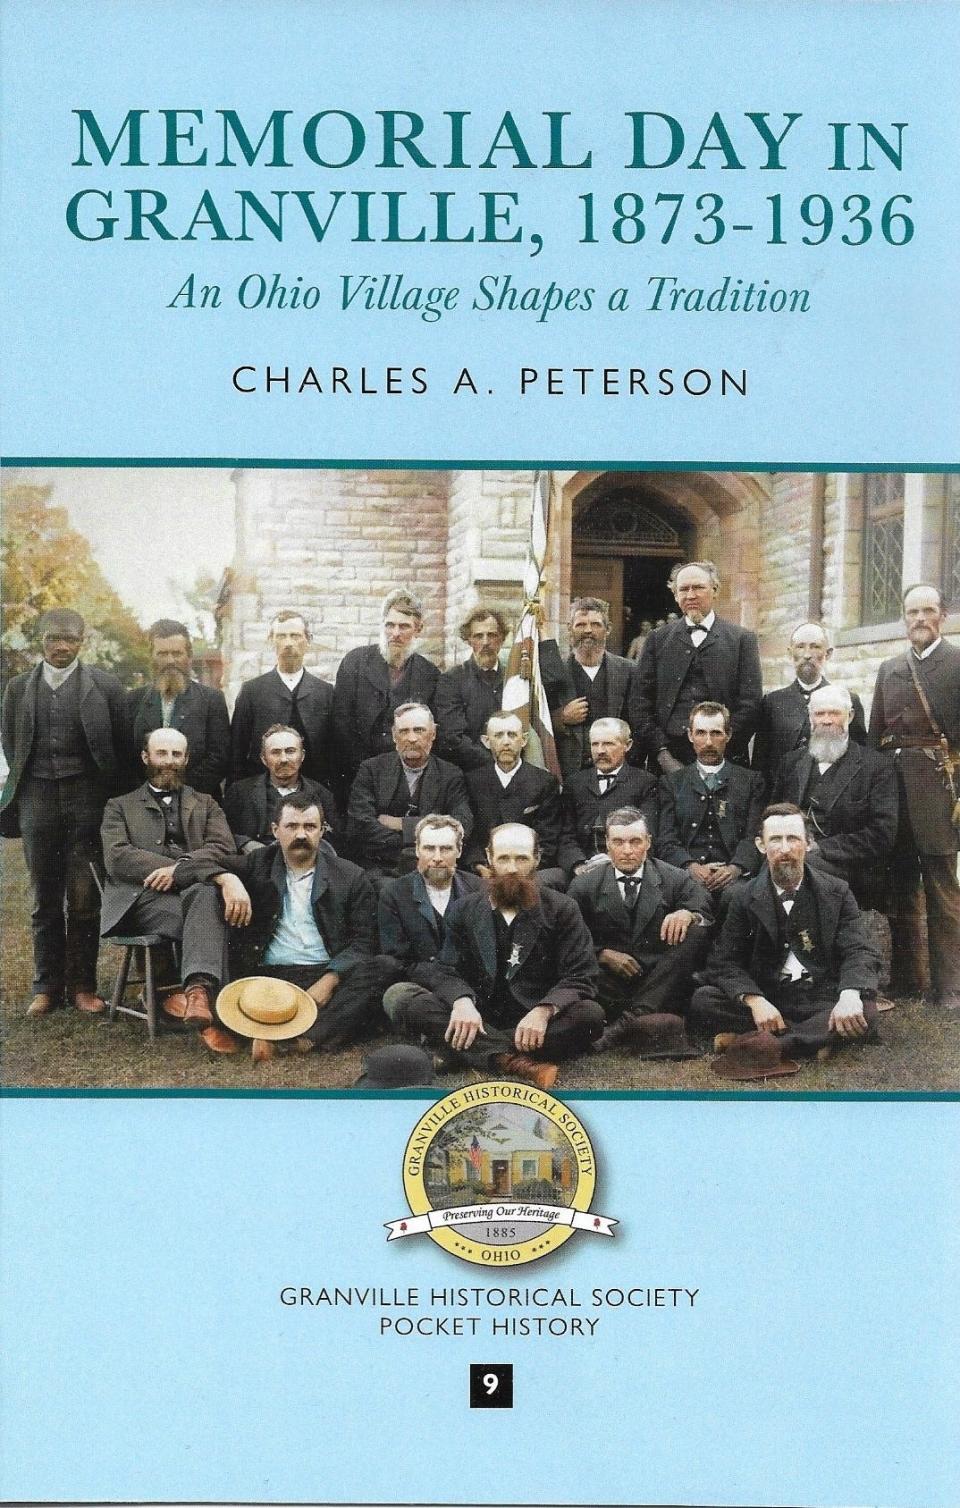 The cover of "Memorial Day in Granville: 1873 to 1936," a pocket history from retired Granville Sentinel editor Charles A. Peterson that details the history of Granville's annual Memorial Day ceremony.